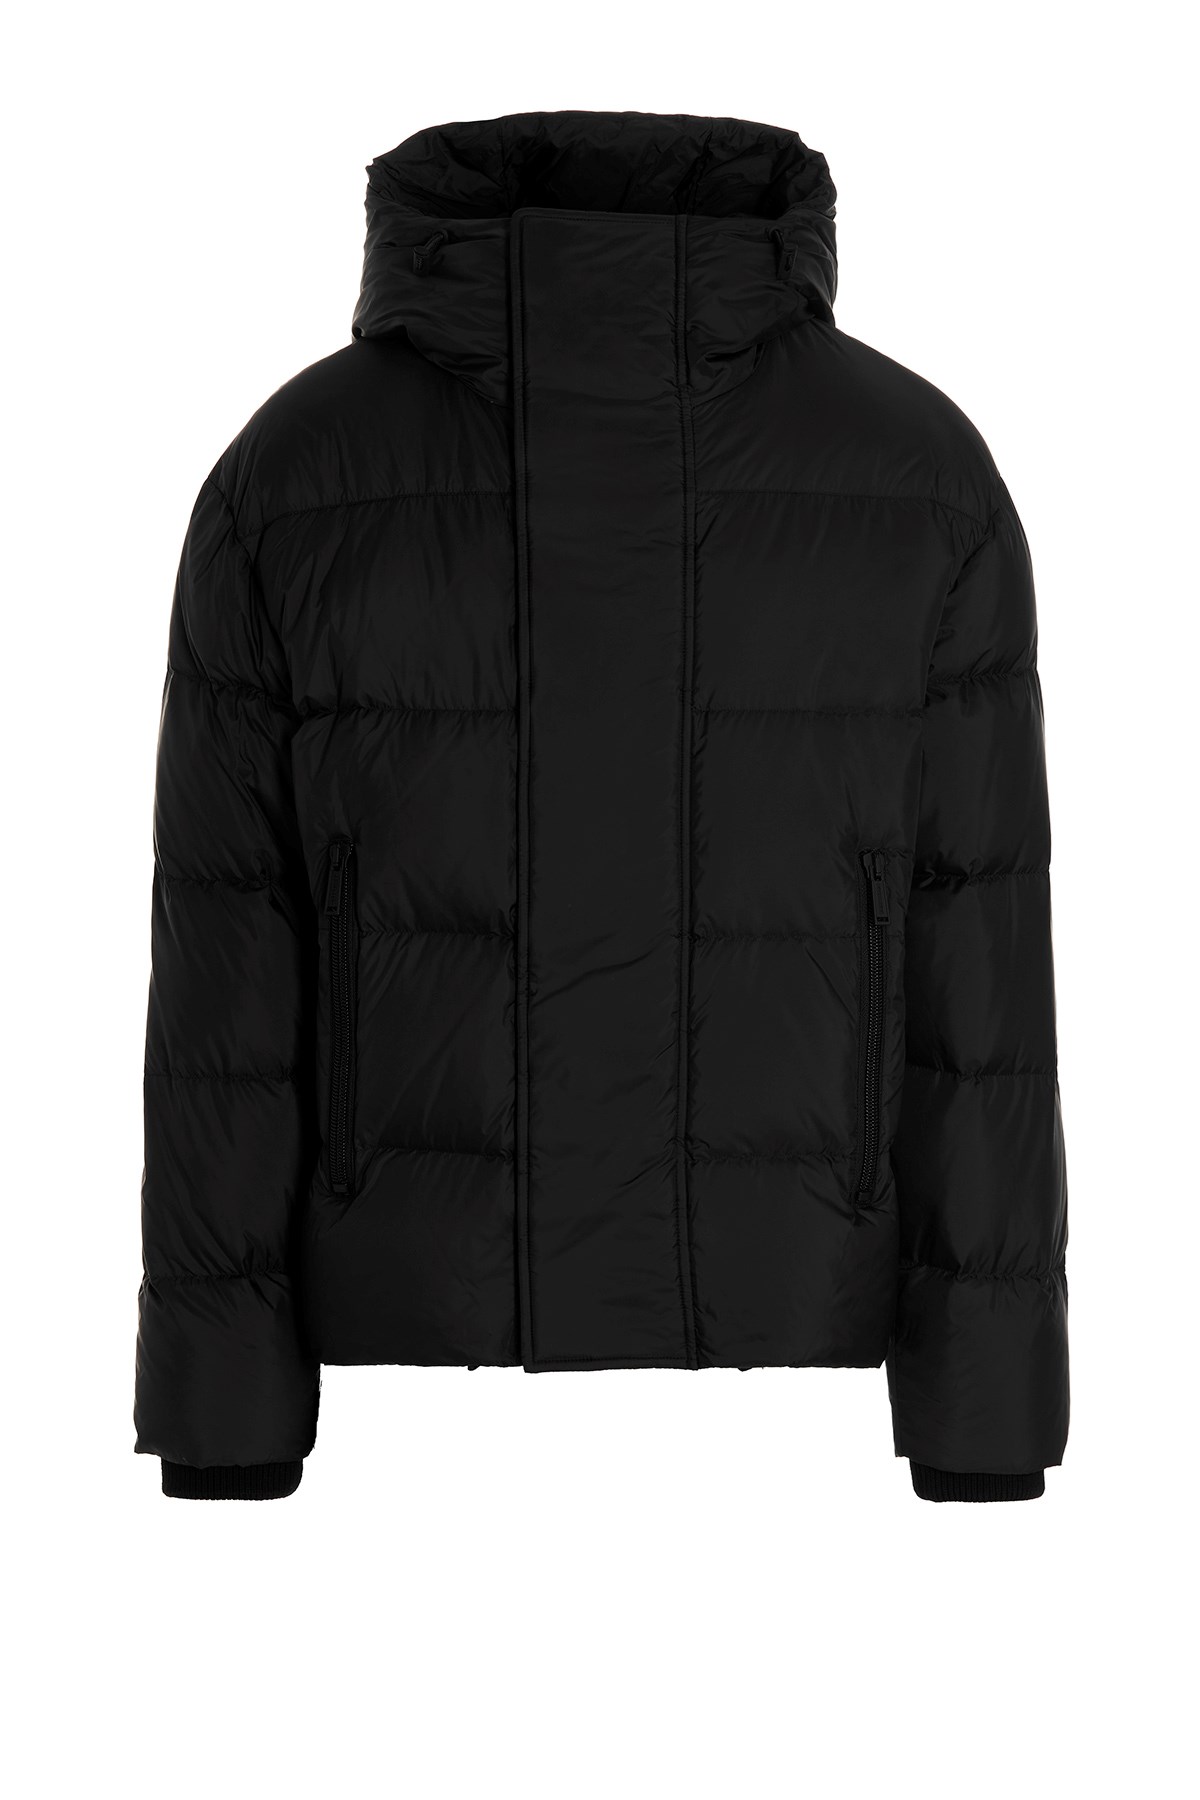 DSQUARED2 'Puffer' Hooded Down Jacket